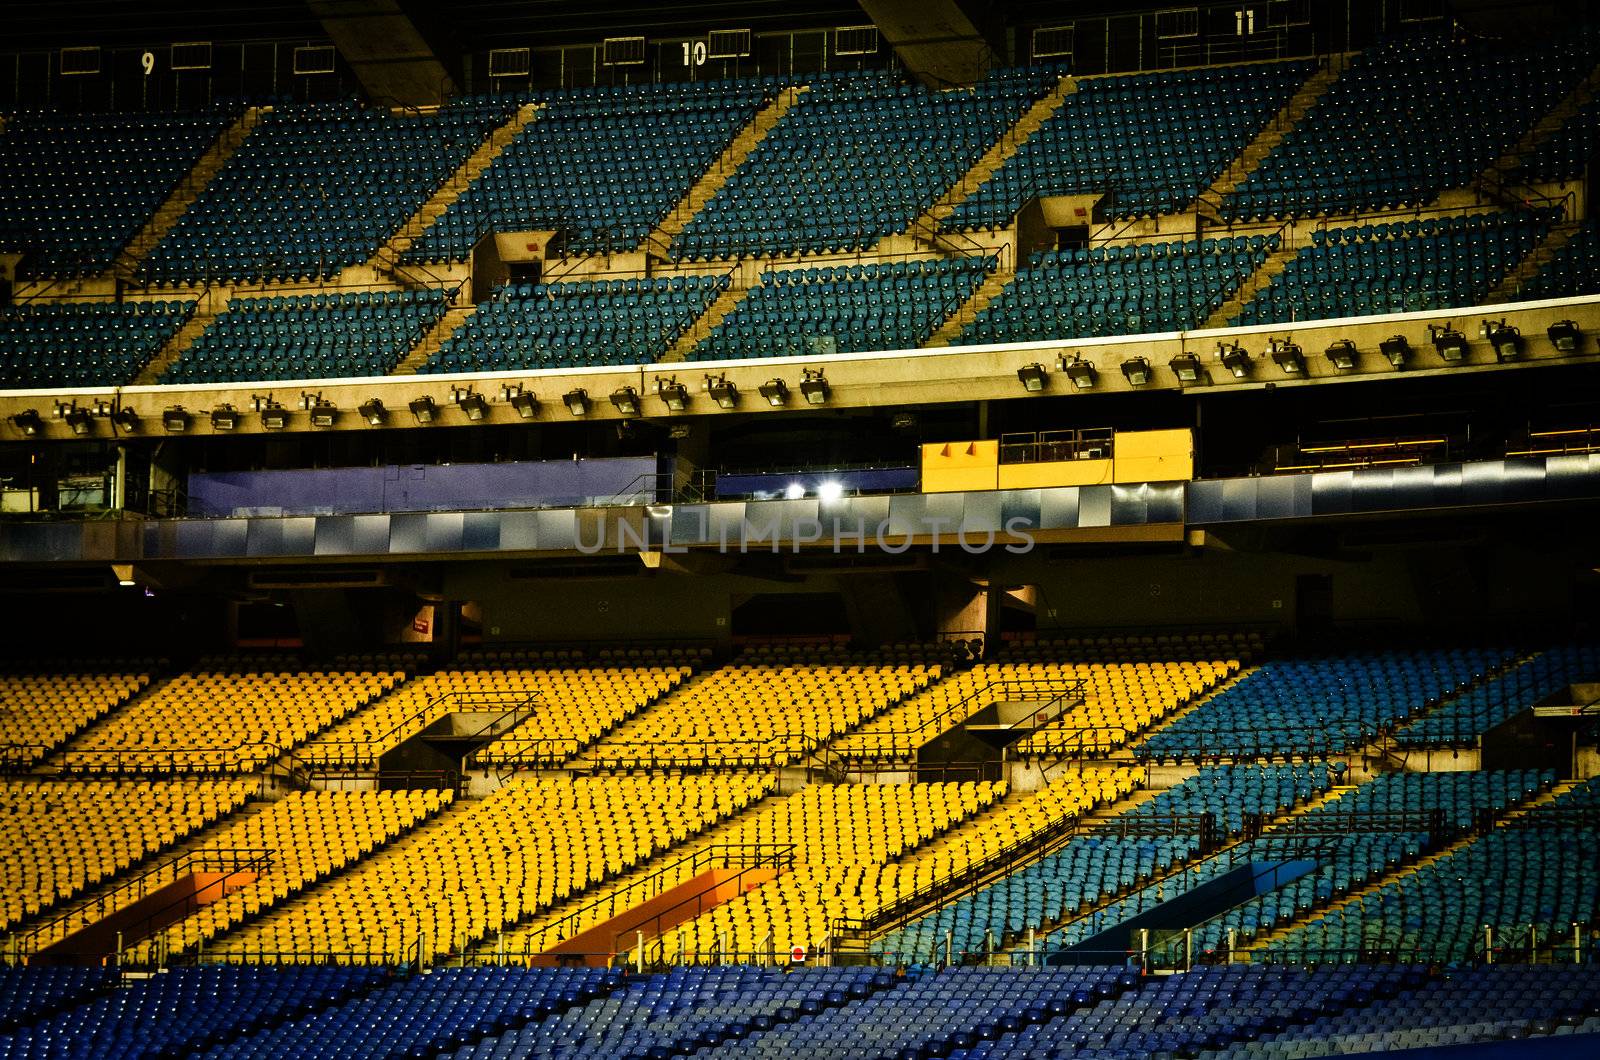 Abandoned and Empty Stadium with yellow and blue seats (nobody)